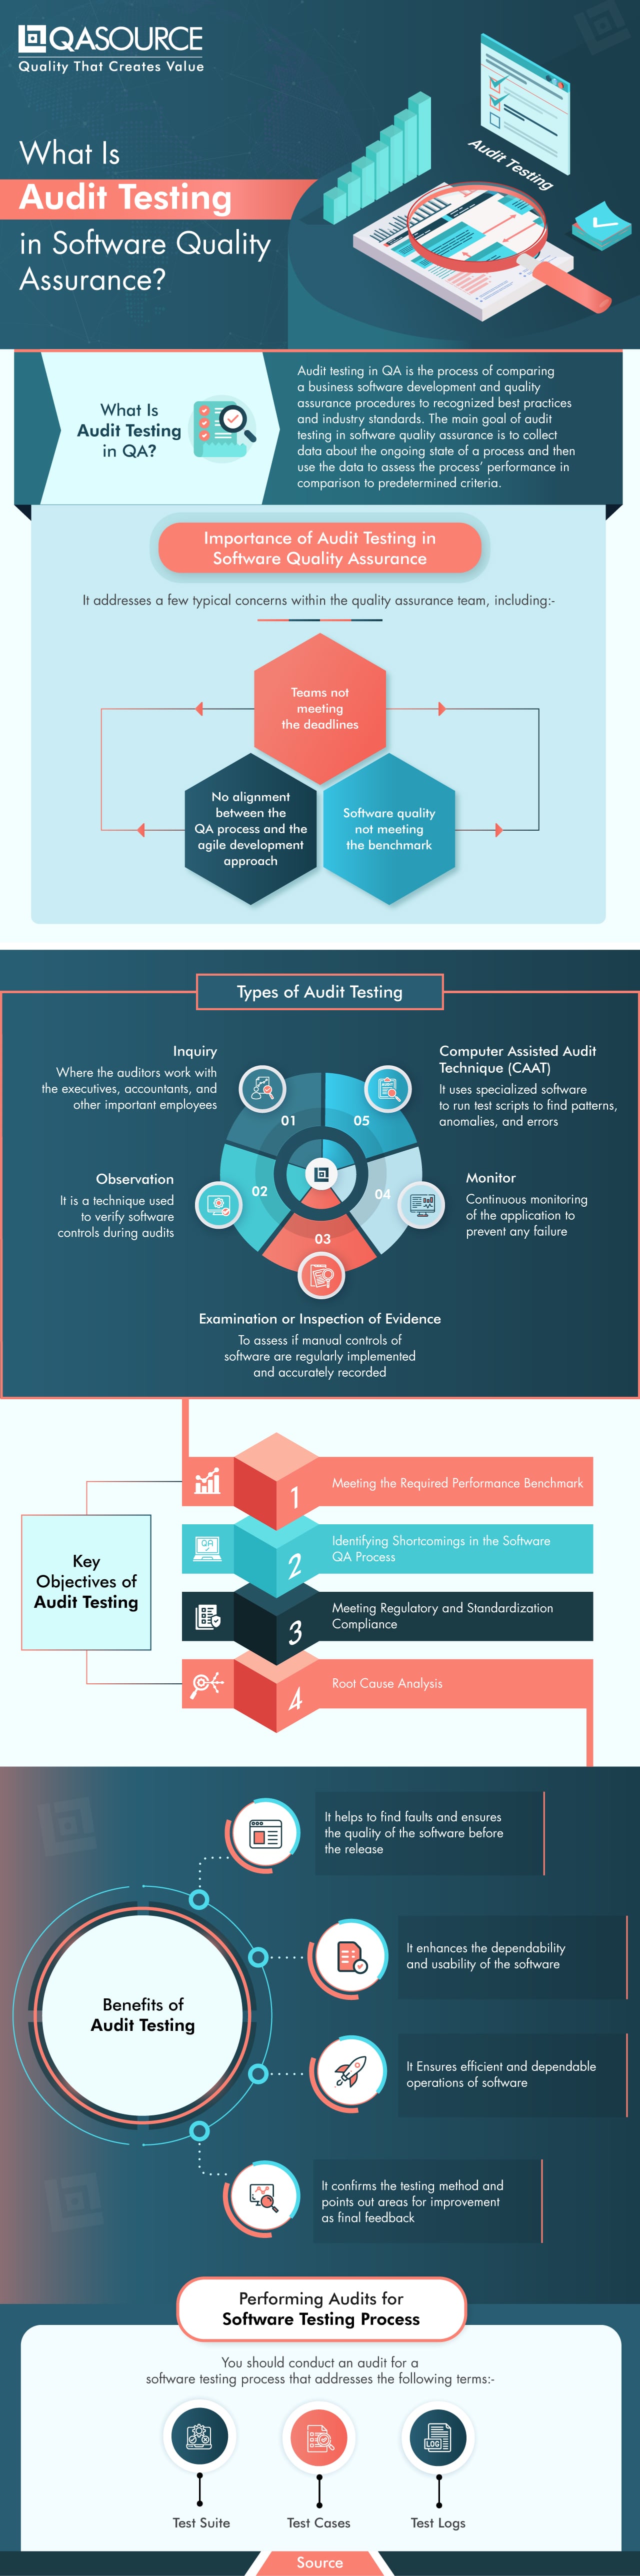 What Is Audit Testing in Software Quality Assurance?